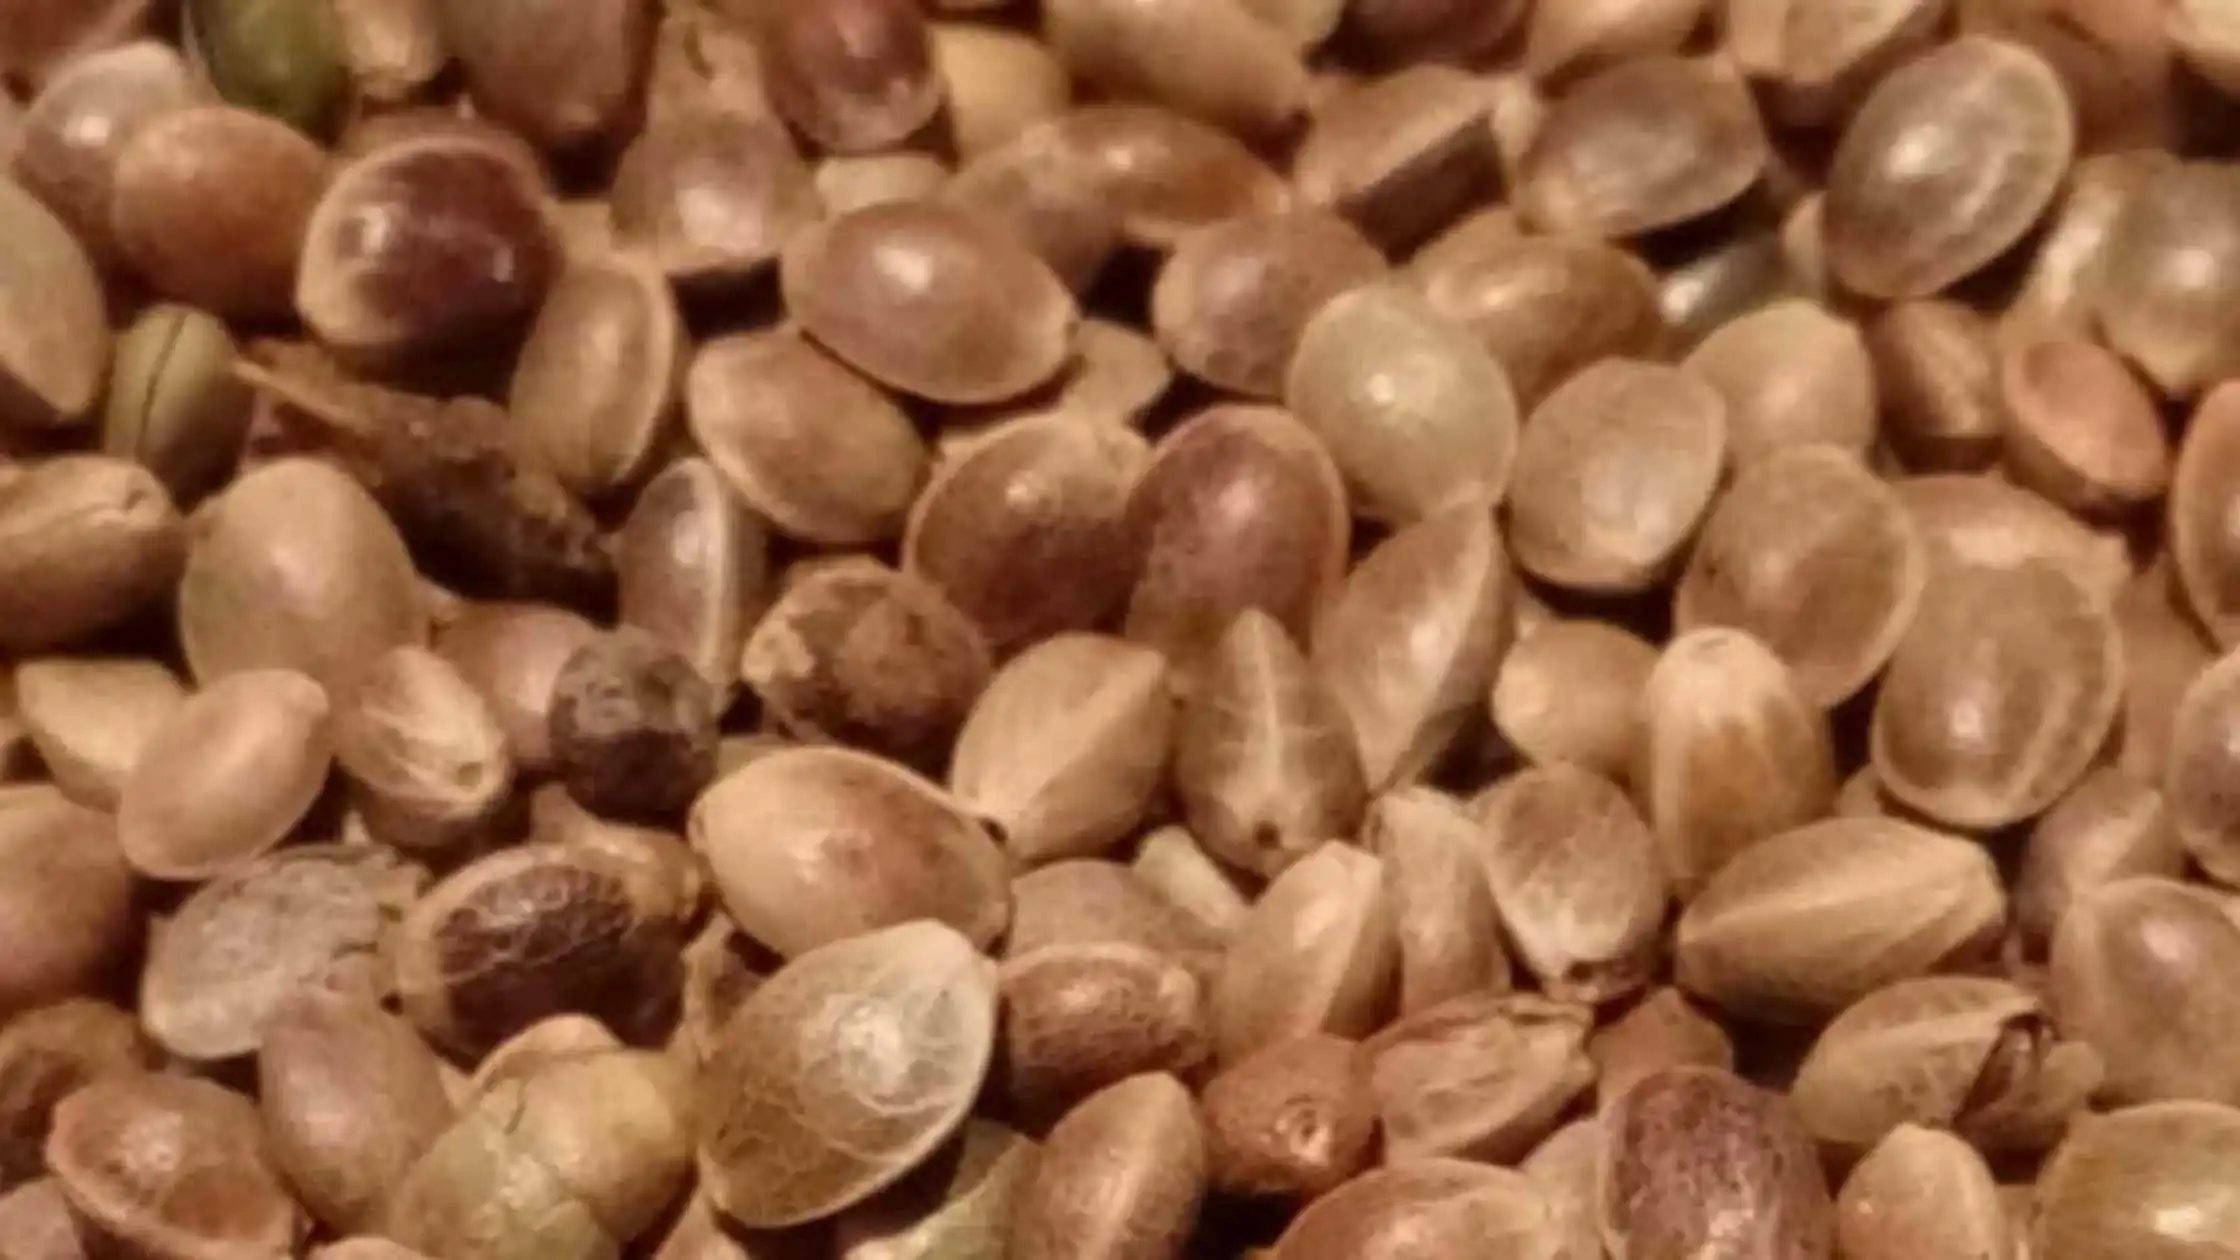 New Guidelines on Hemp Planting Seeds in Europe Highlights “Major Modification”